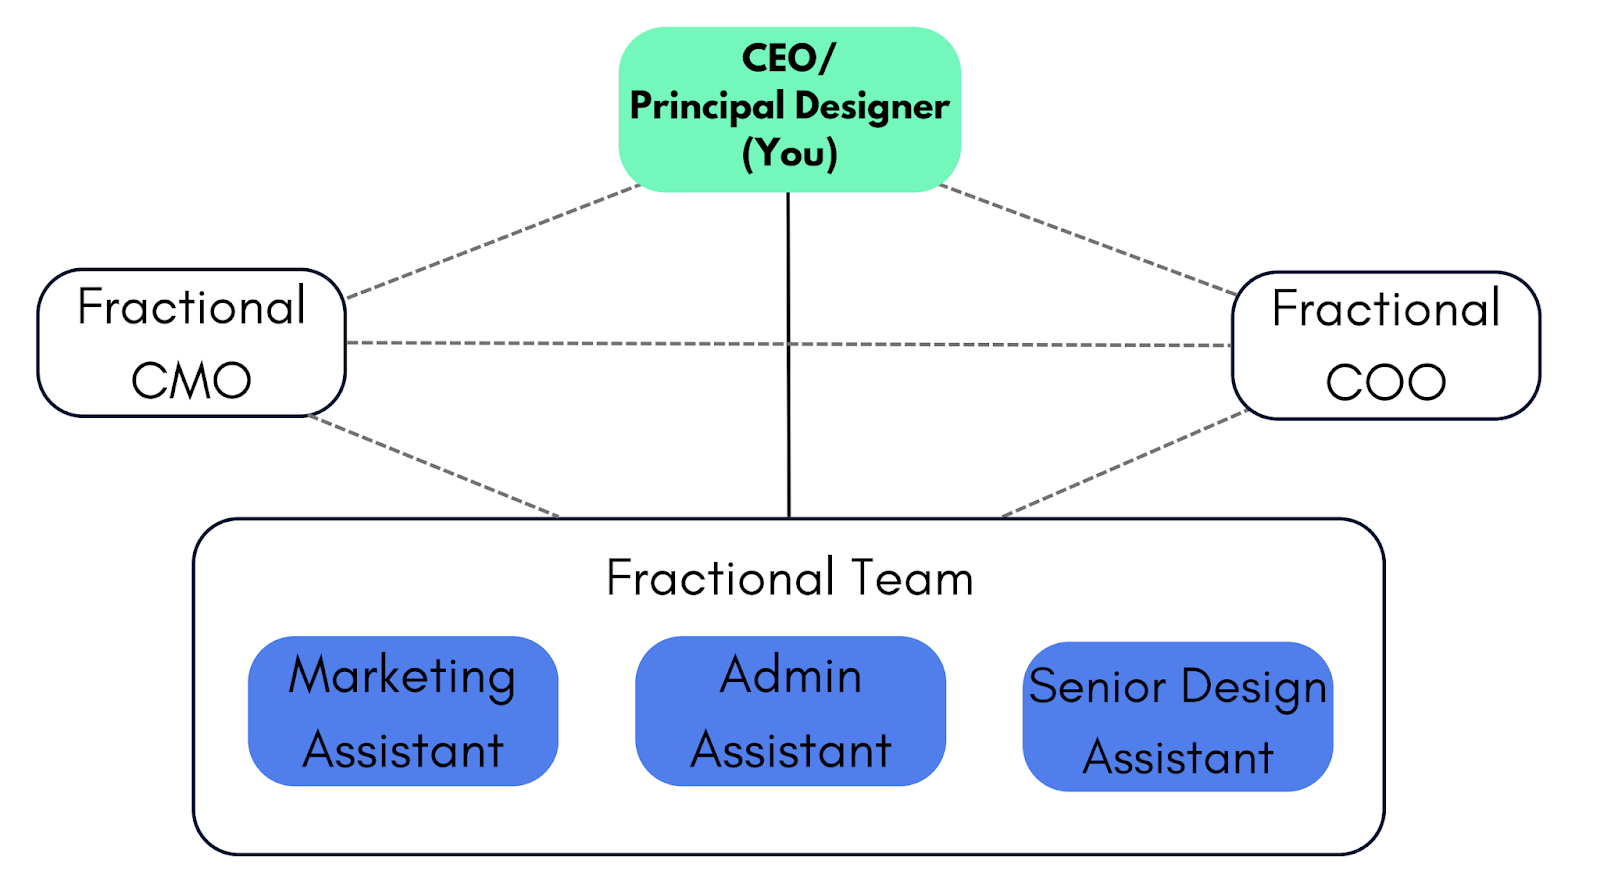 Working with a fractional COO